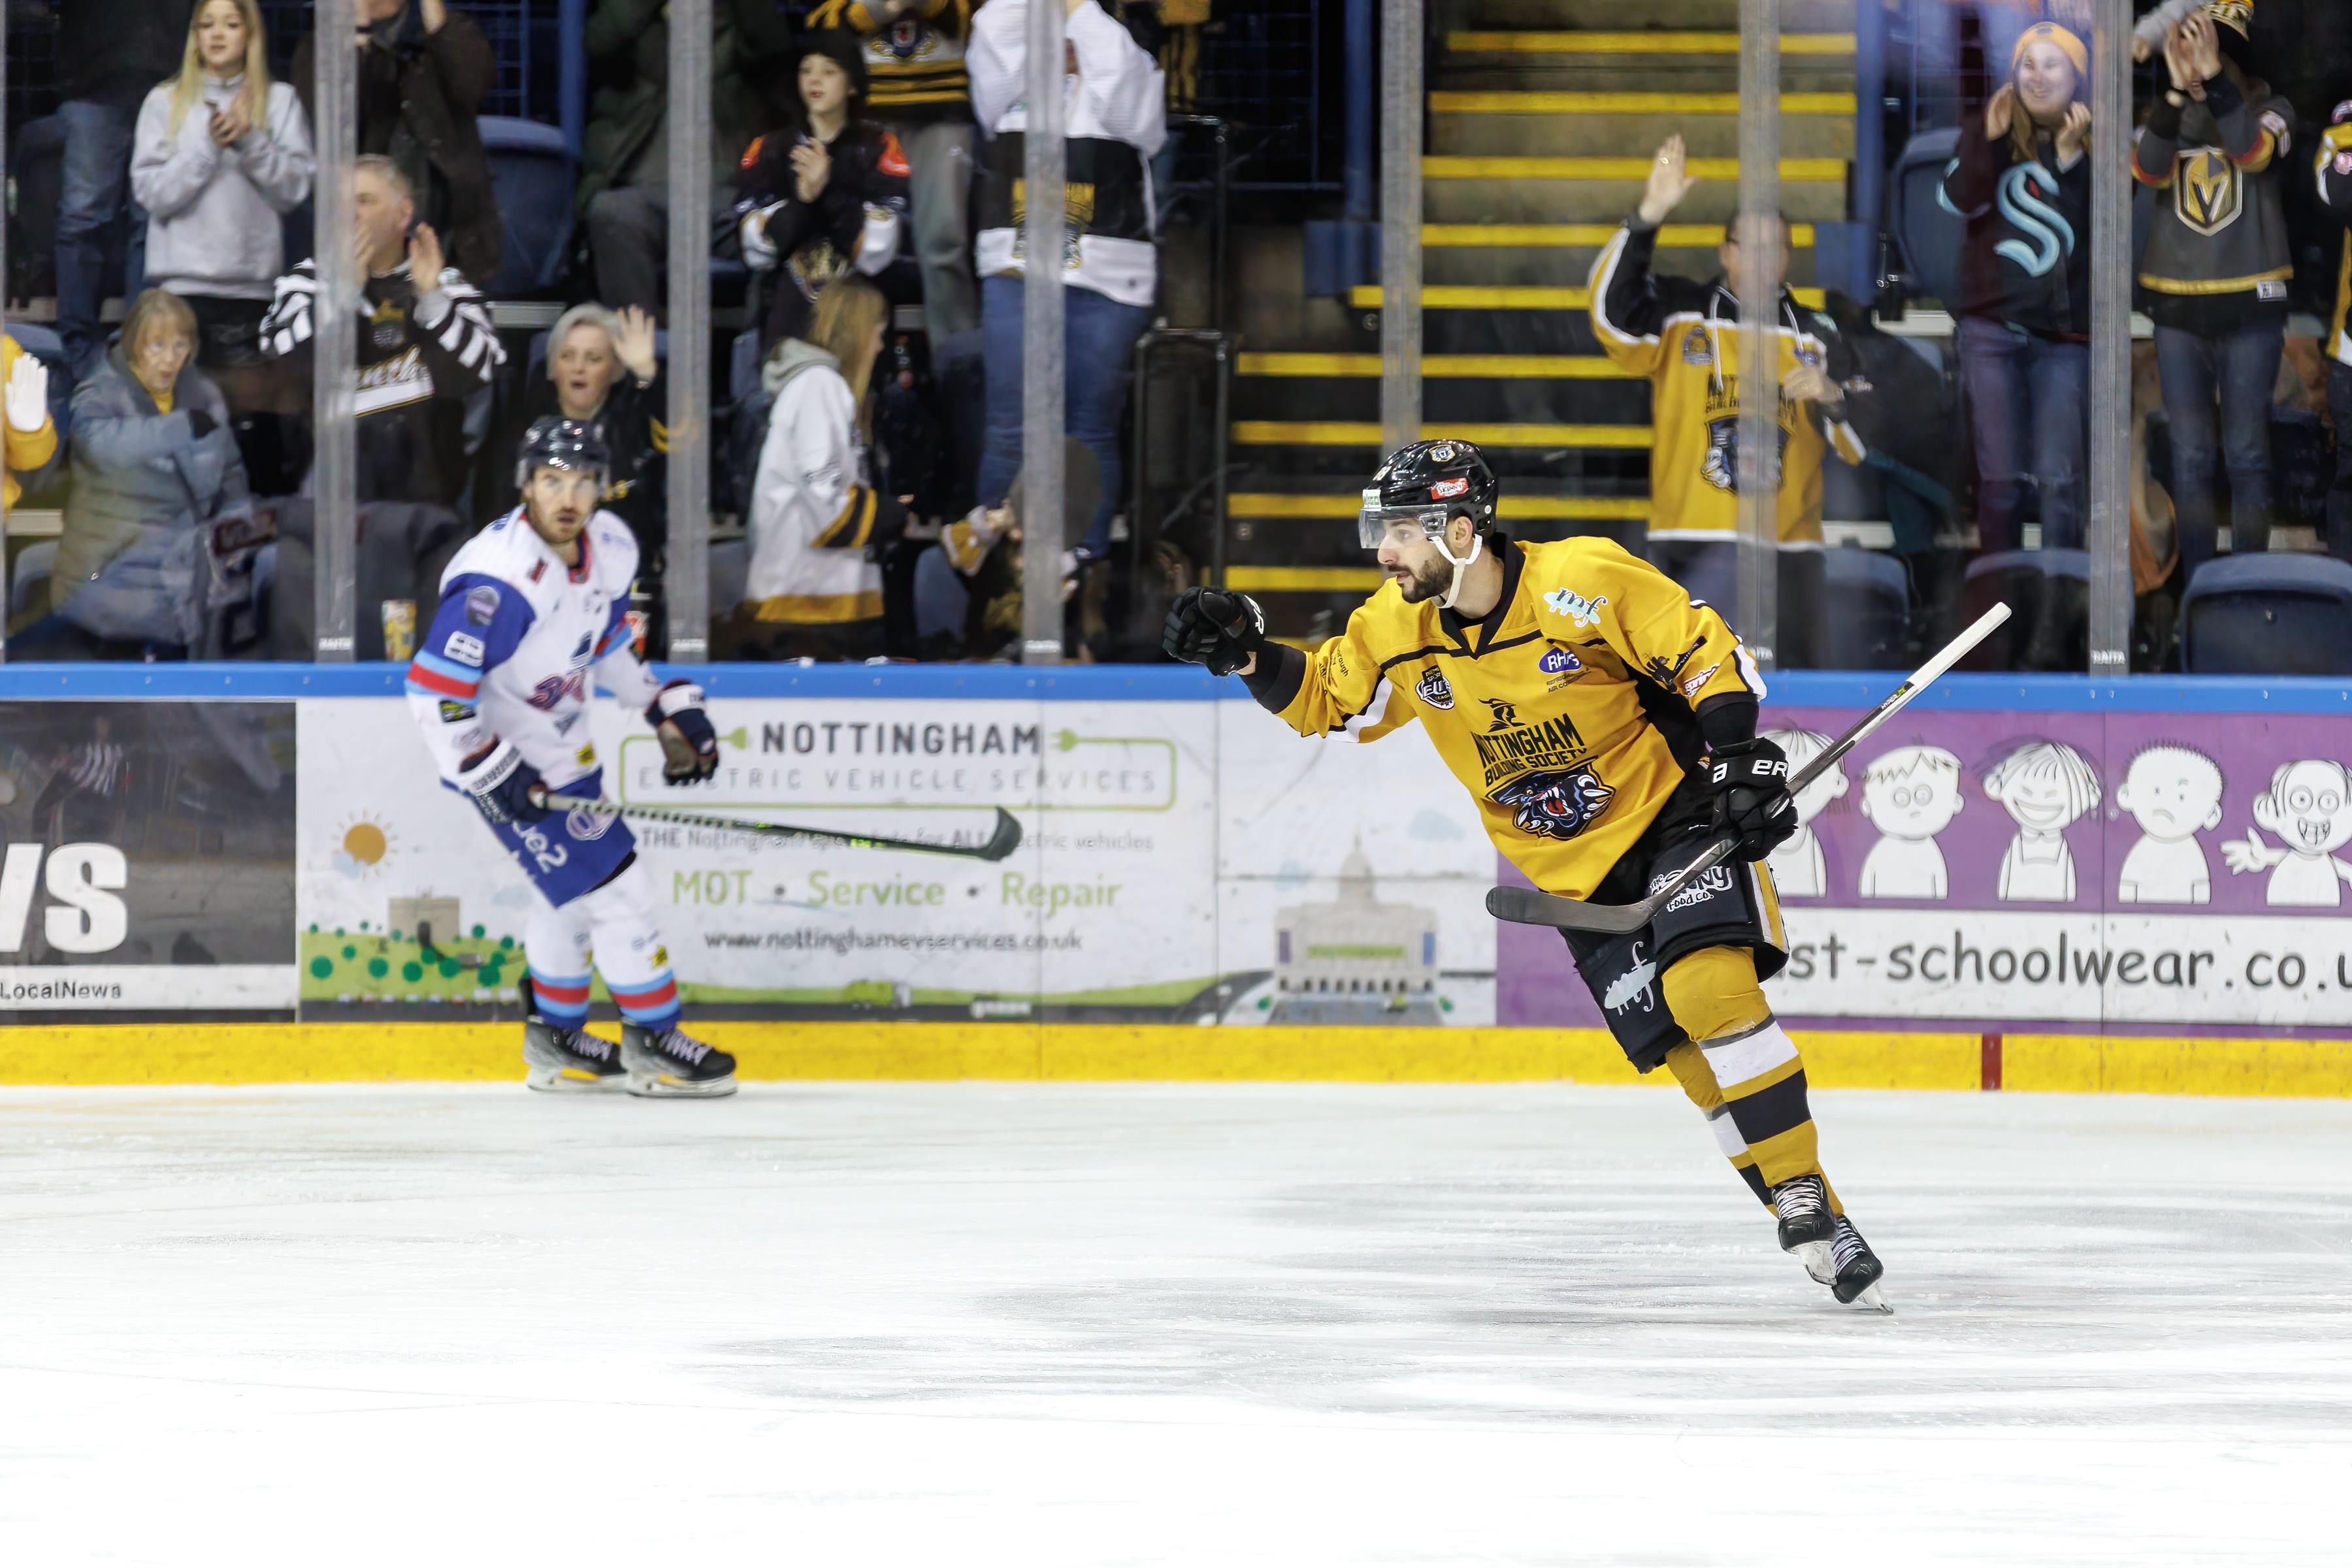 MIDWEEK ACTION FOR THE PANTHERS Top Image